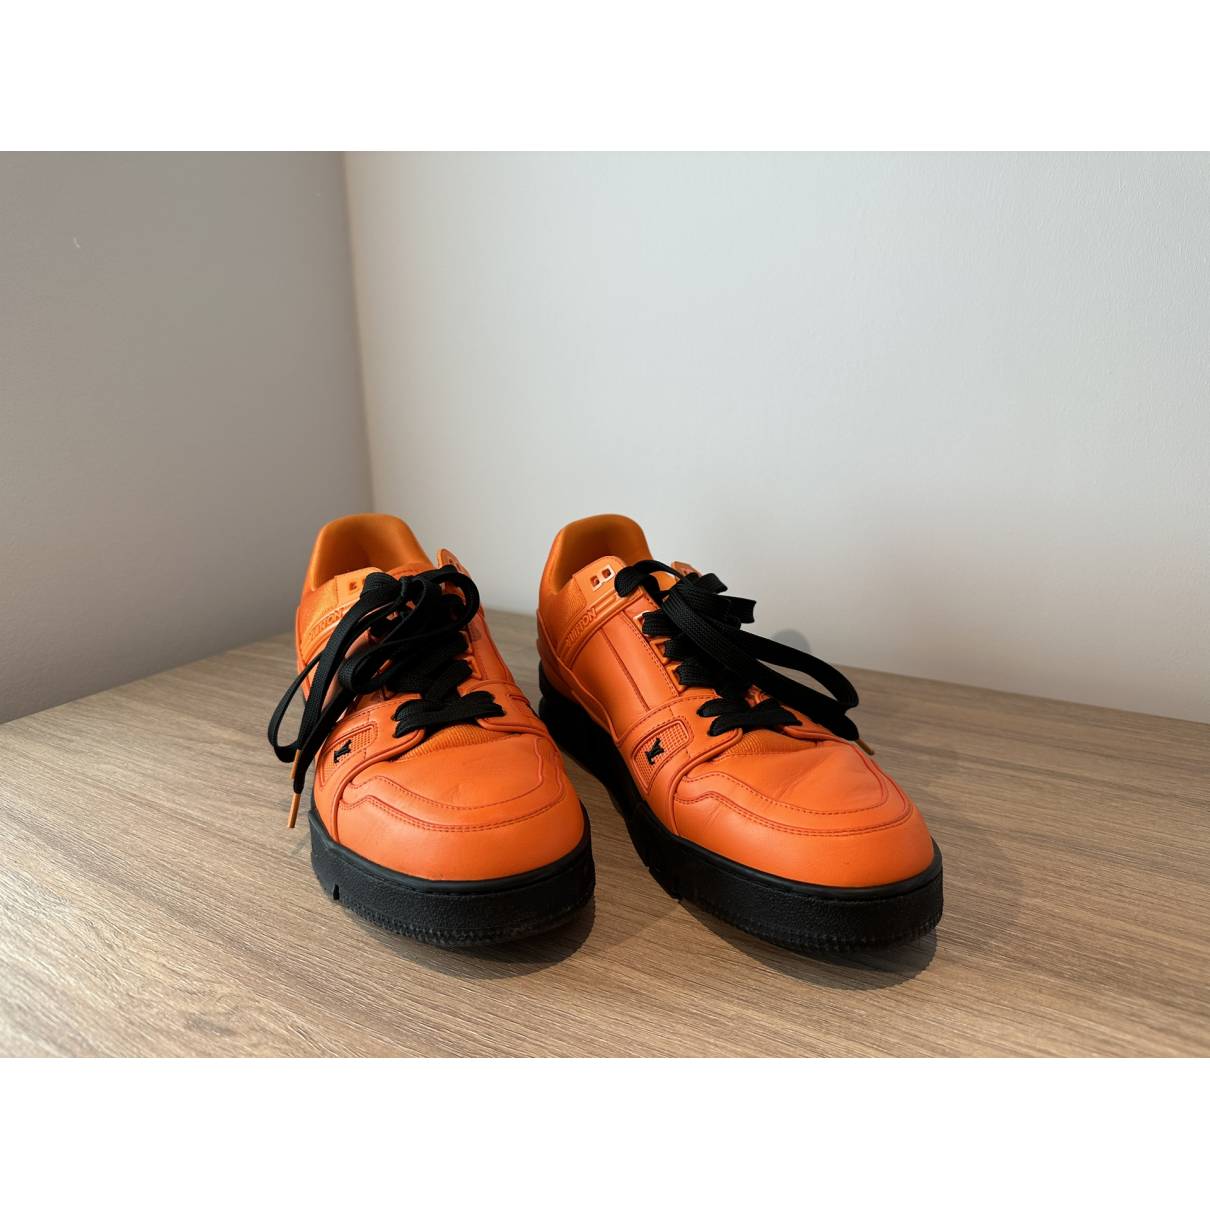 Lv trainer leather high trainers Louis Vuitton Orange size 10 UK in Leather  - 31410173